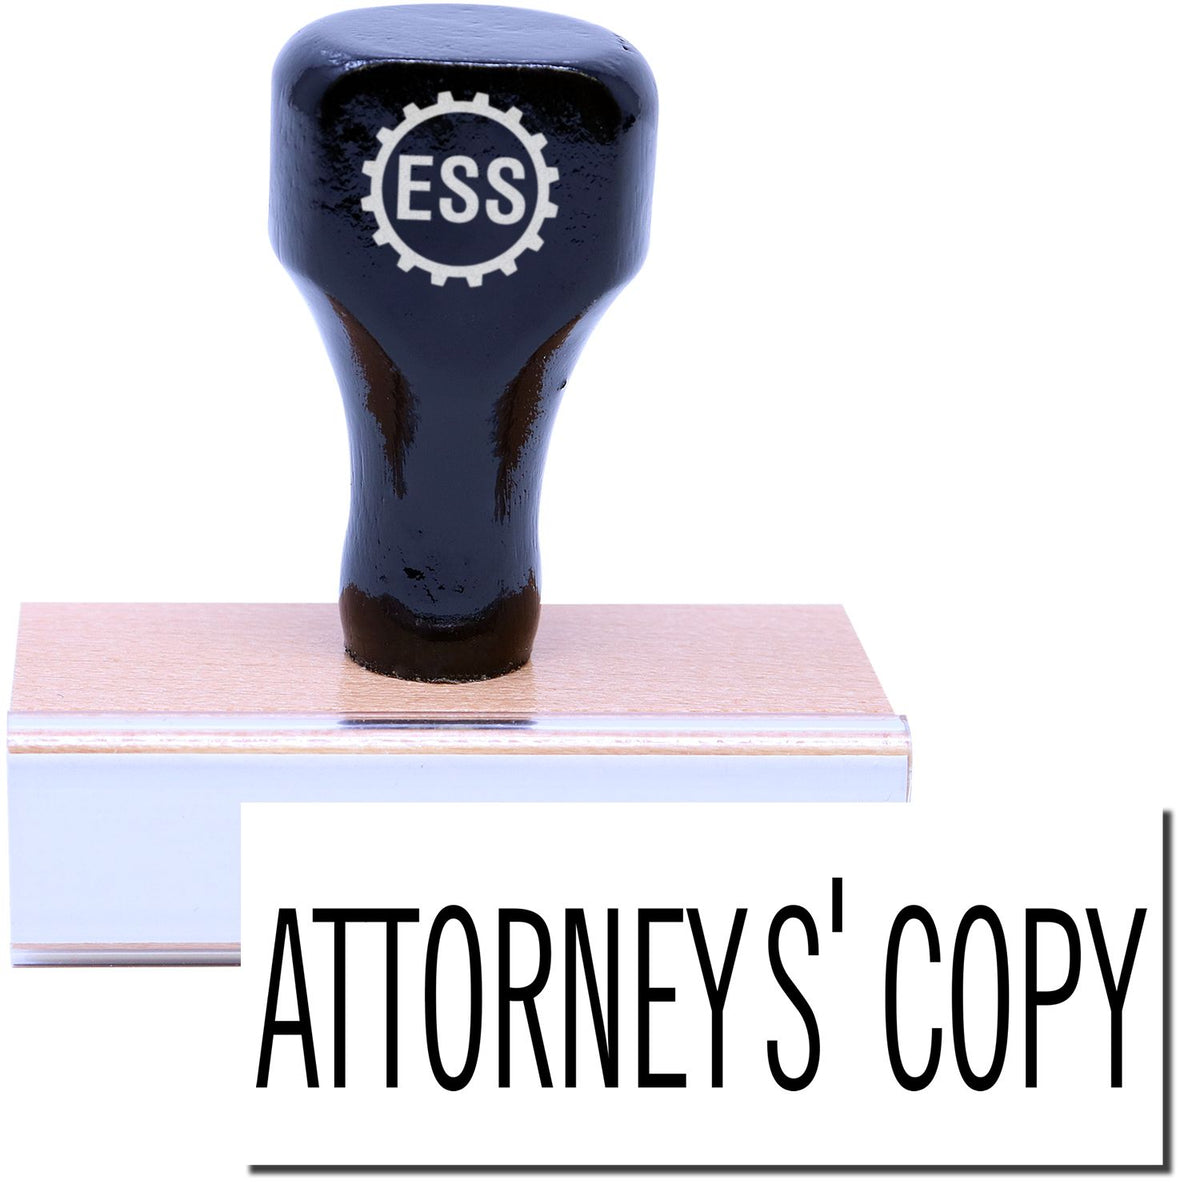 A stock office rubber stamp with a stamped image showing how the text &quot;ATTORNEYS&#39; COPY&quot; is displayed after stamping.